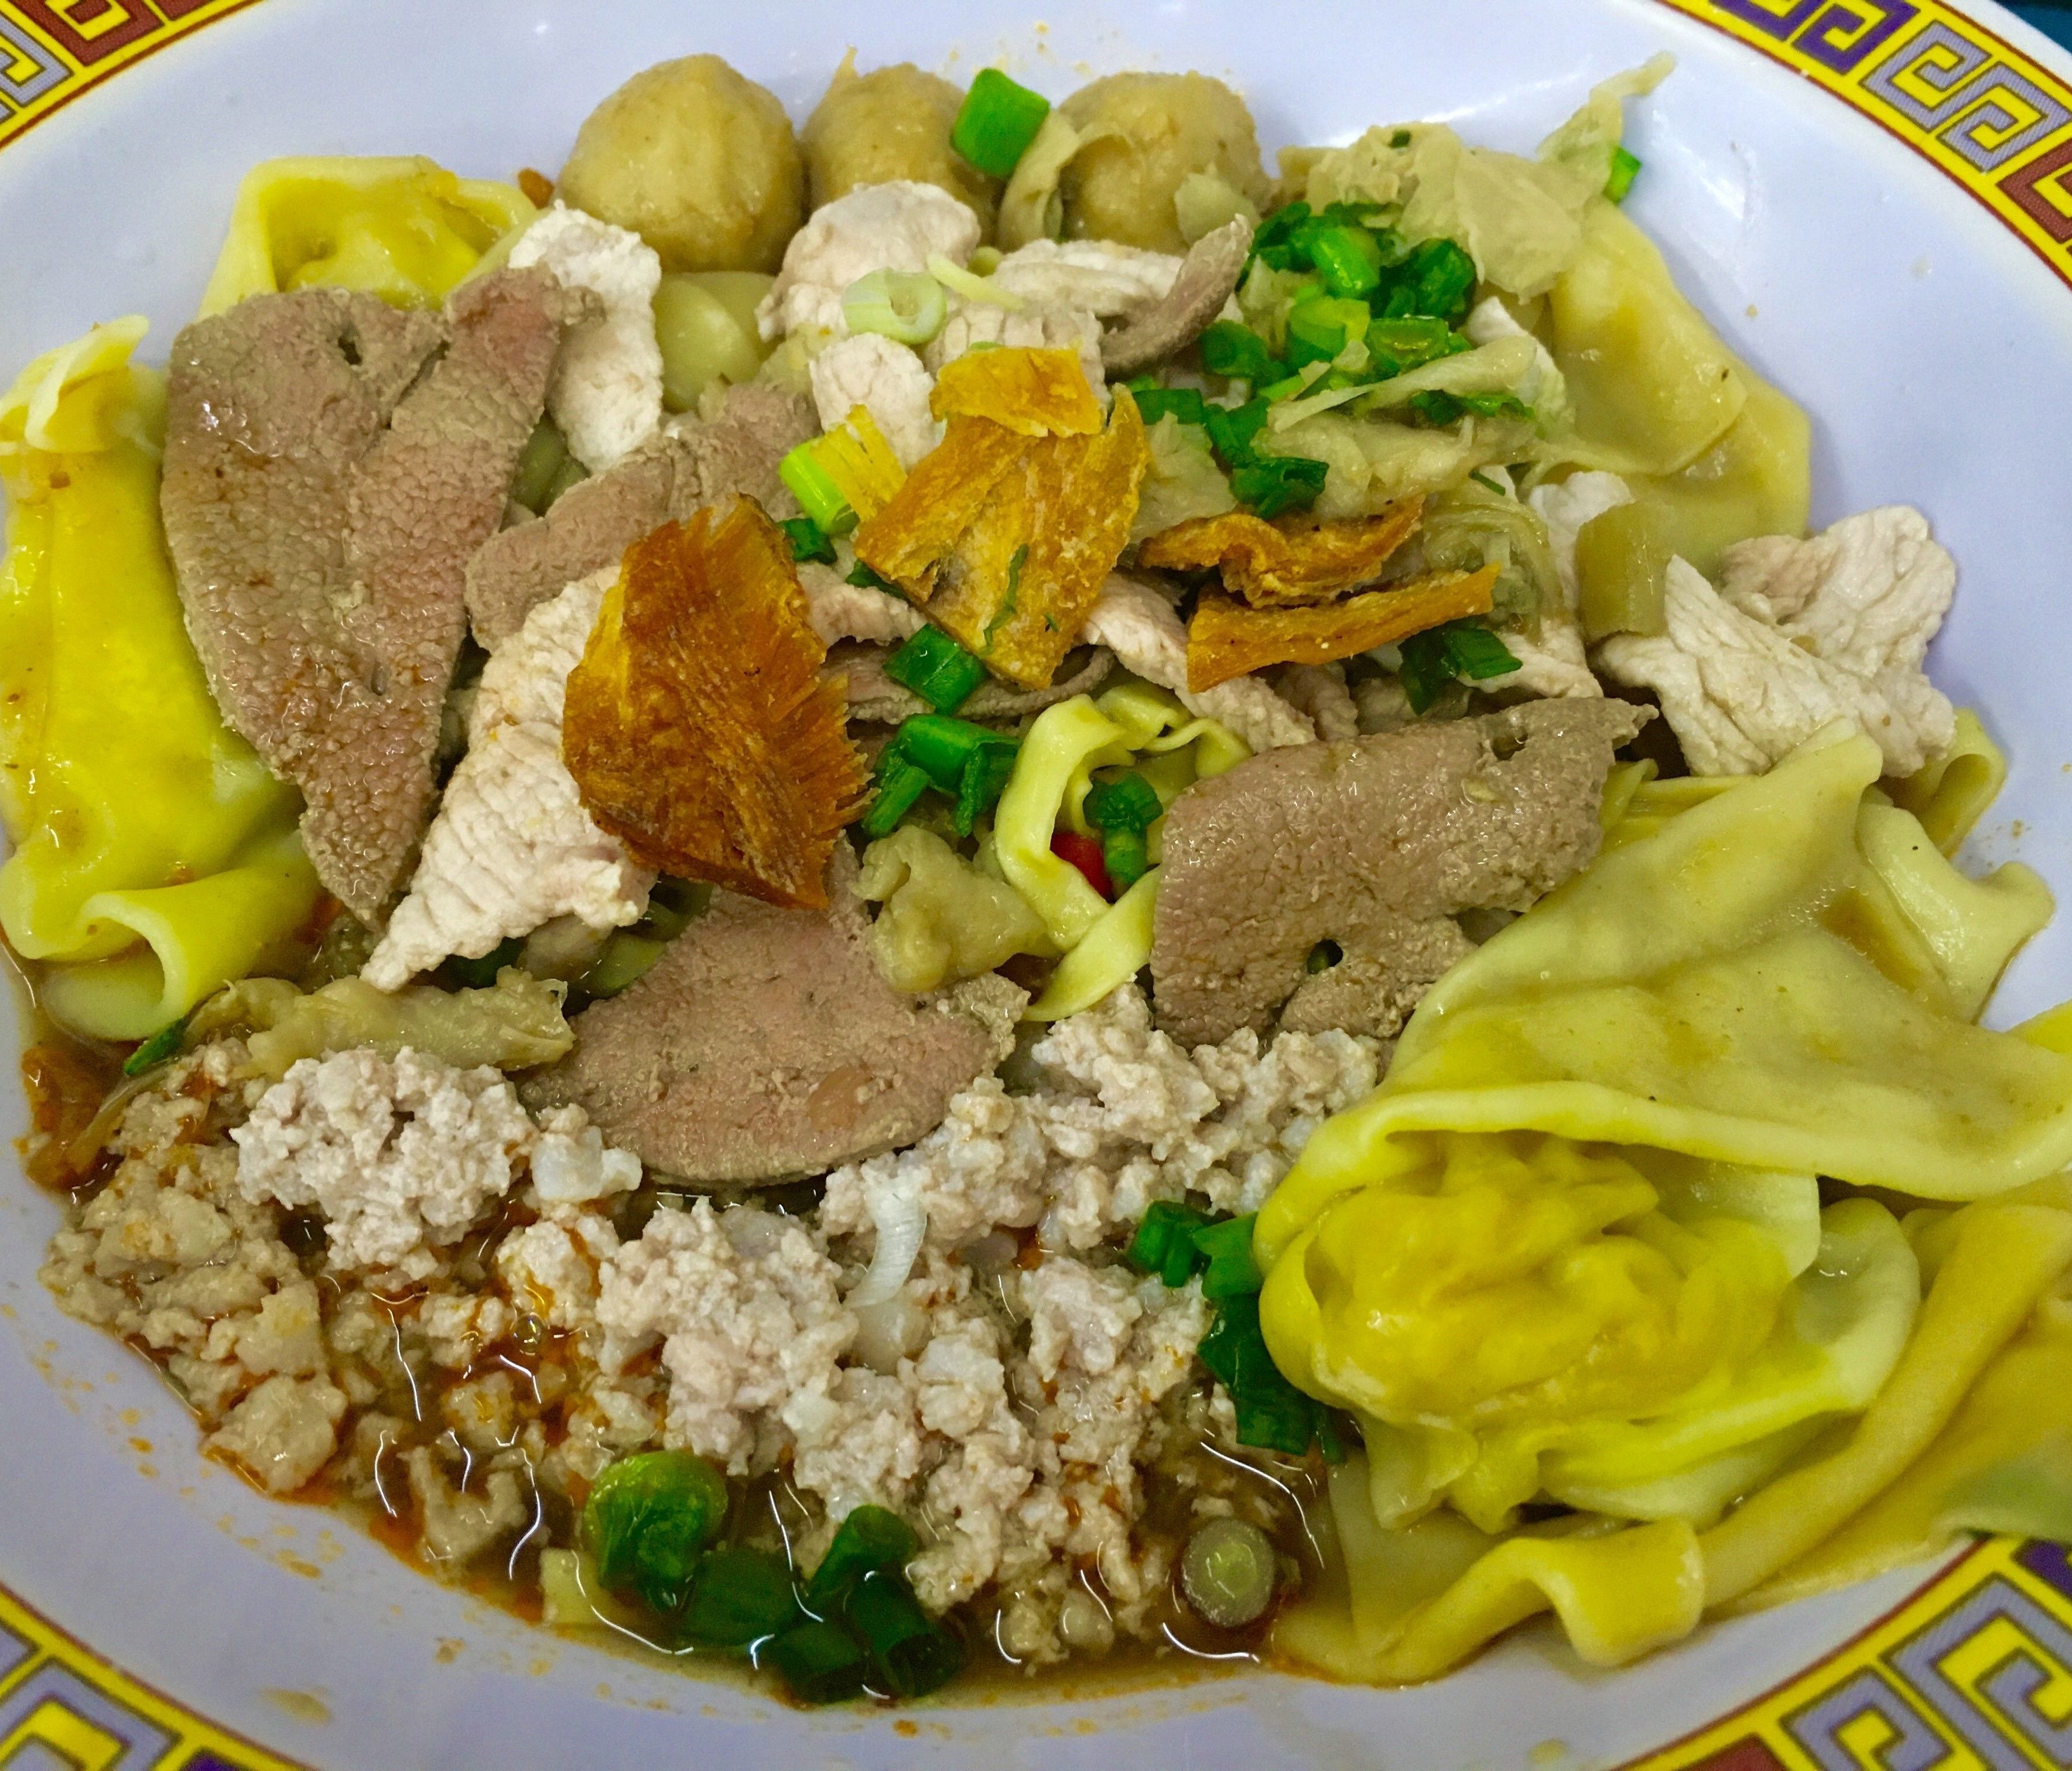 Hill Street Tai Hwa Pork Noodle's specialty dish is  bak chor mee. The noodles are tossed in black vinegar and chili paste and topped with pork dumplings, minced pork and meatballs. There is also dried sole fish mixed in.